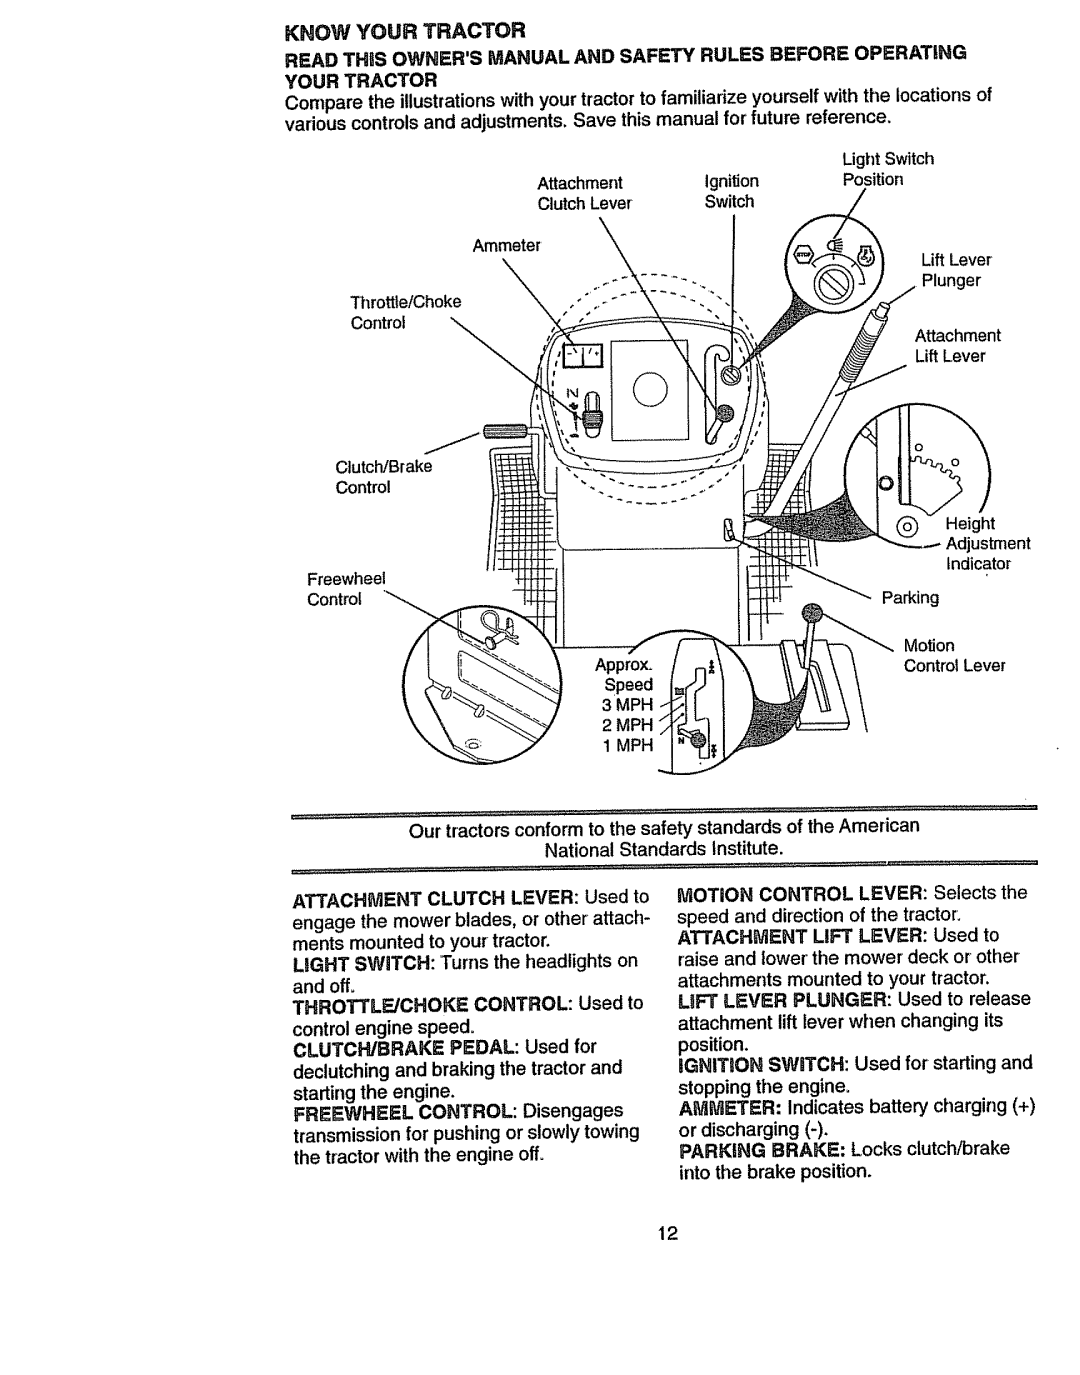 Craftsman 917270841 owner manual Know Your Tractor, Clutch Lever, Switch, Throttle!Choke, Control, Approx 